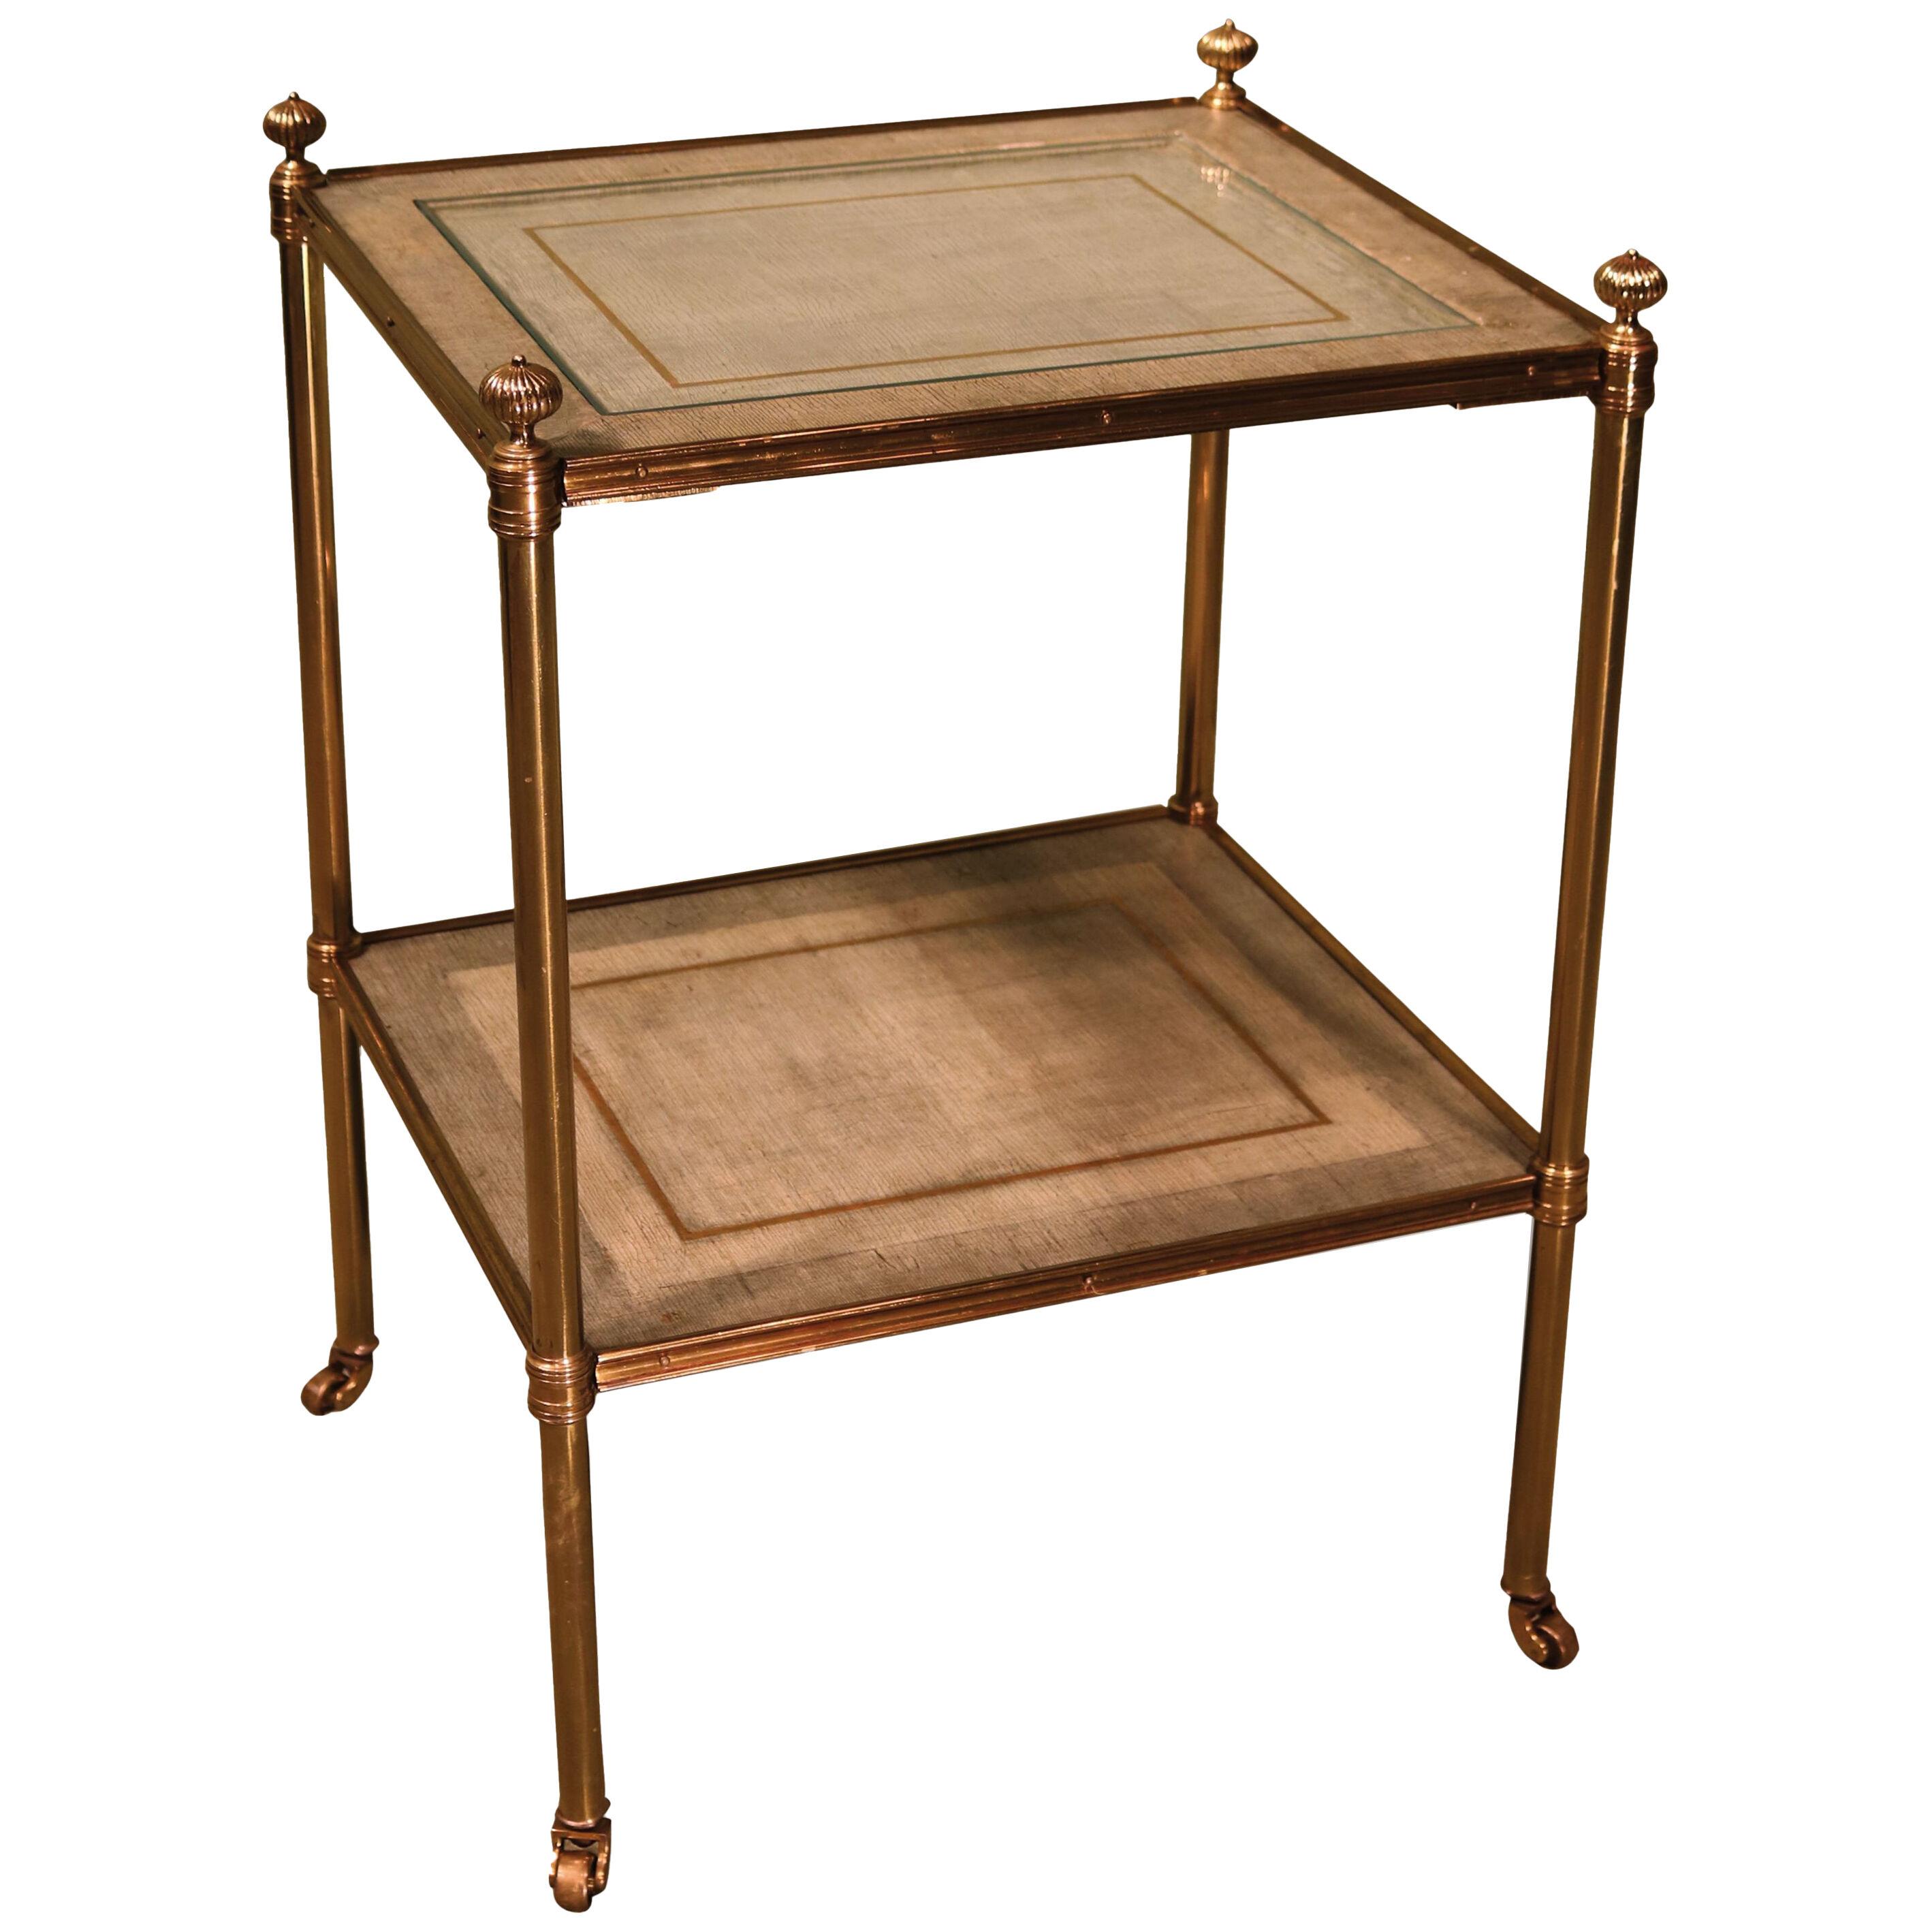 A 20th century English 2-tier Etagere